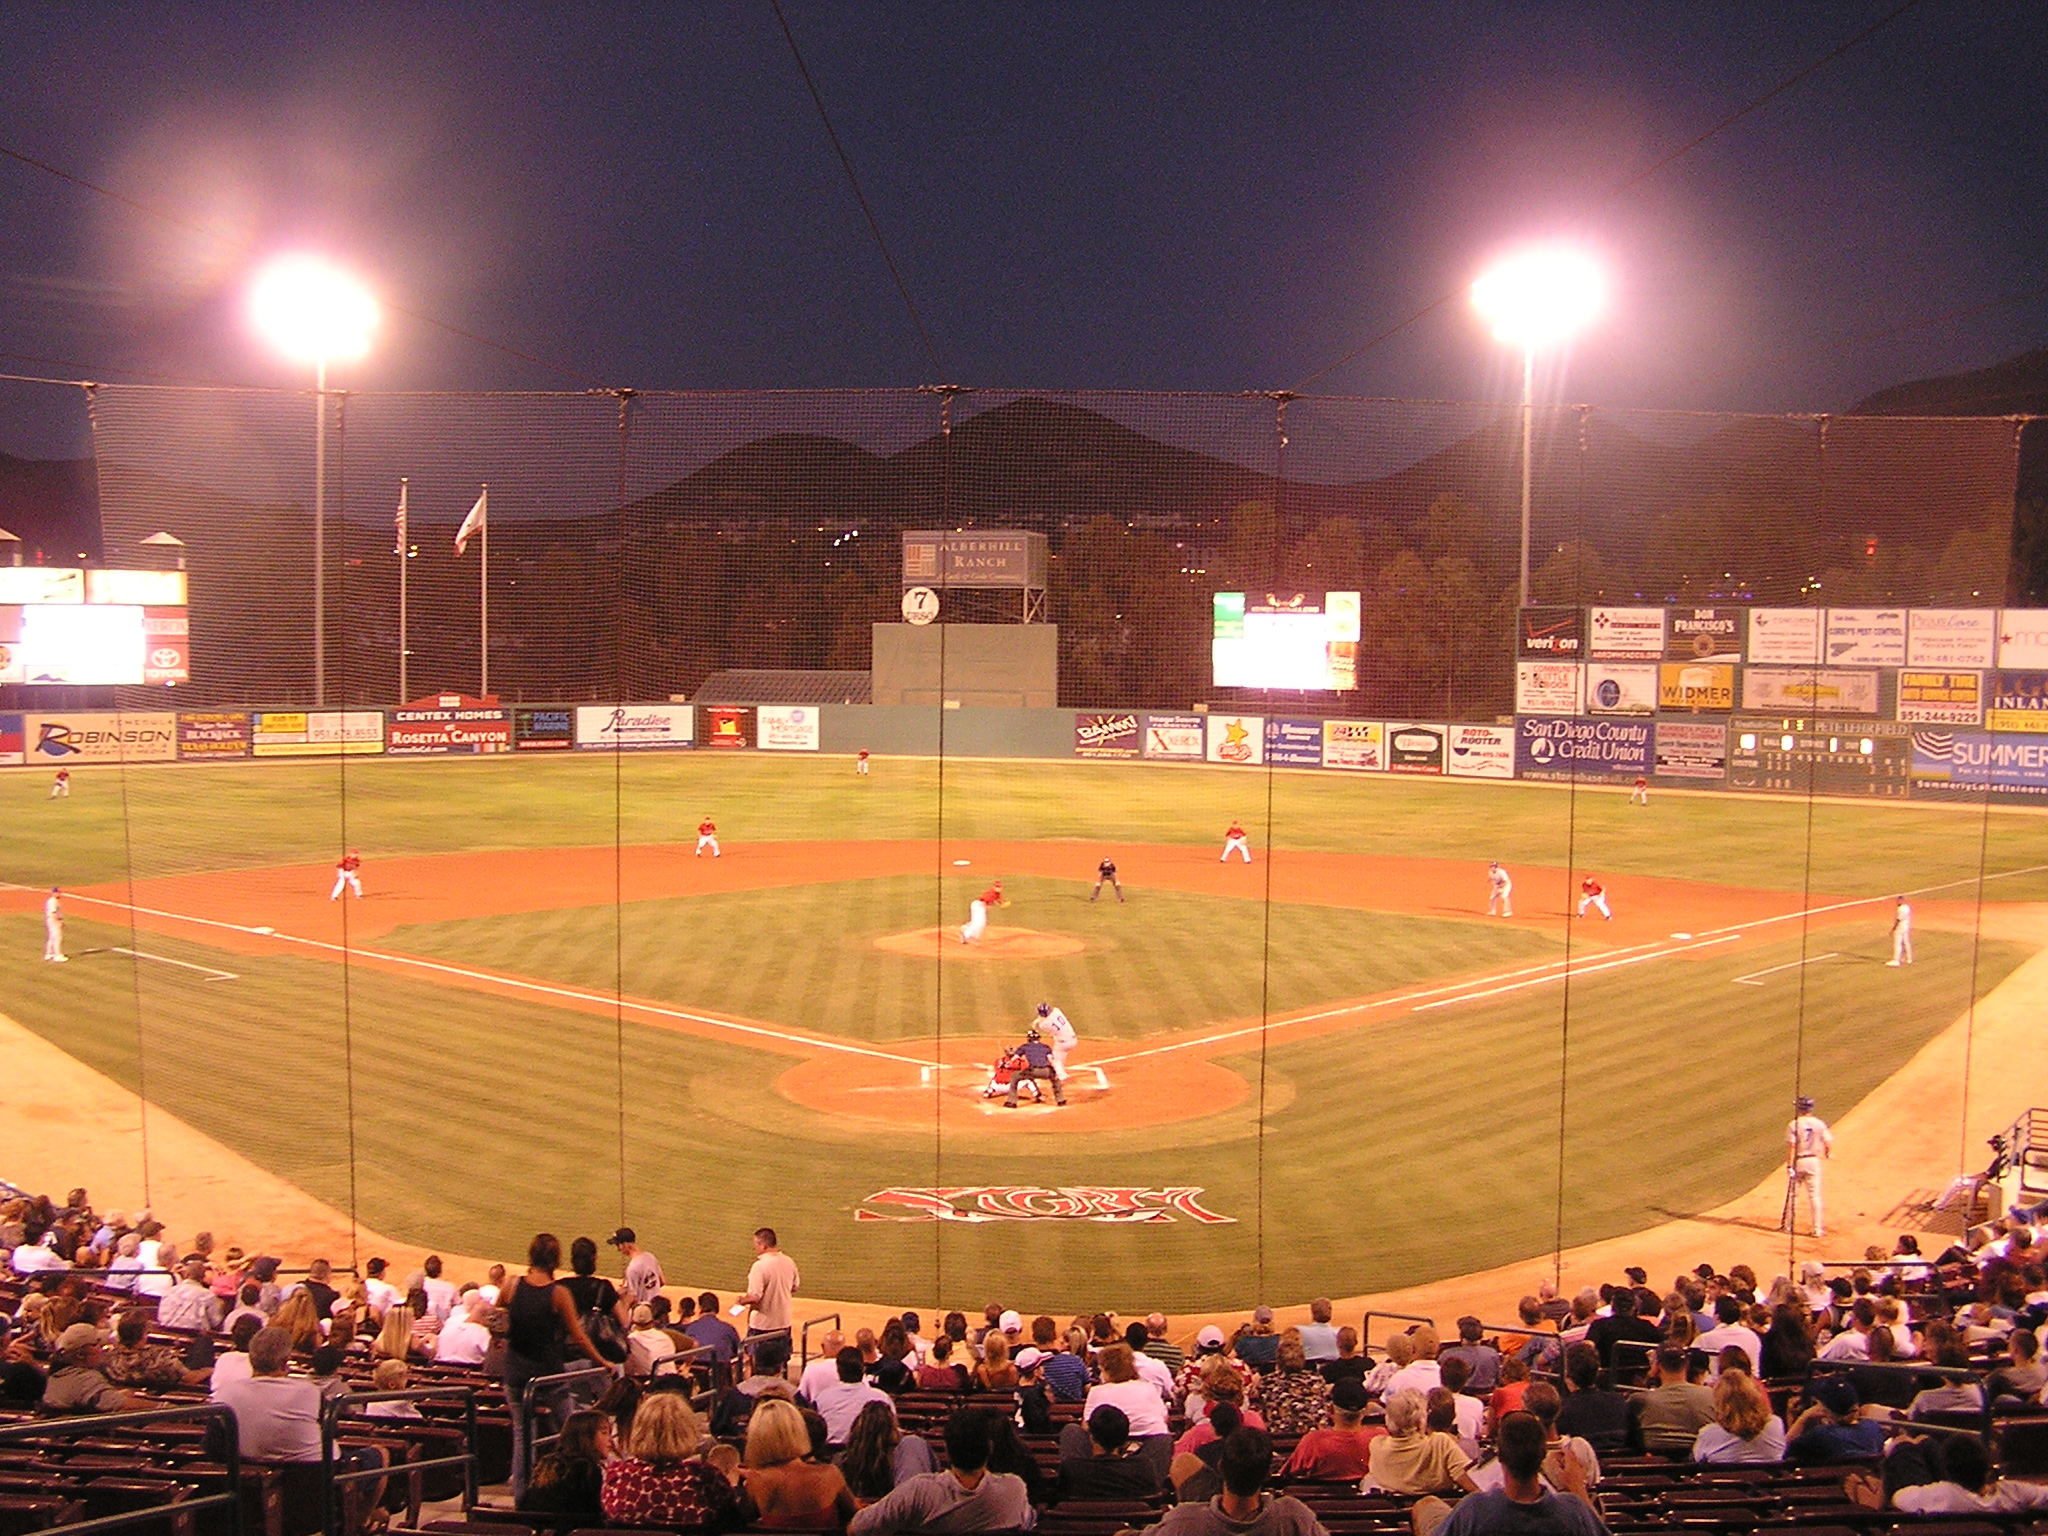 Looking out onto the LE Diamond - Lake Elsinore